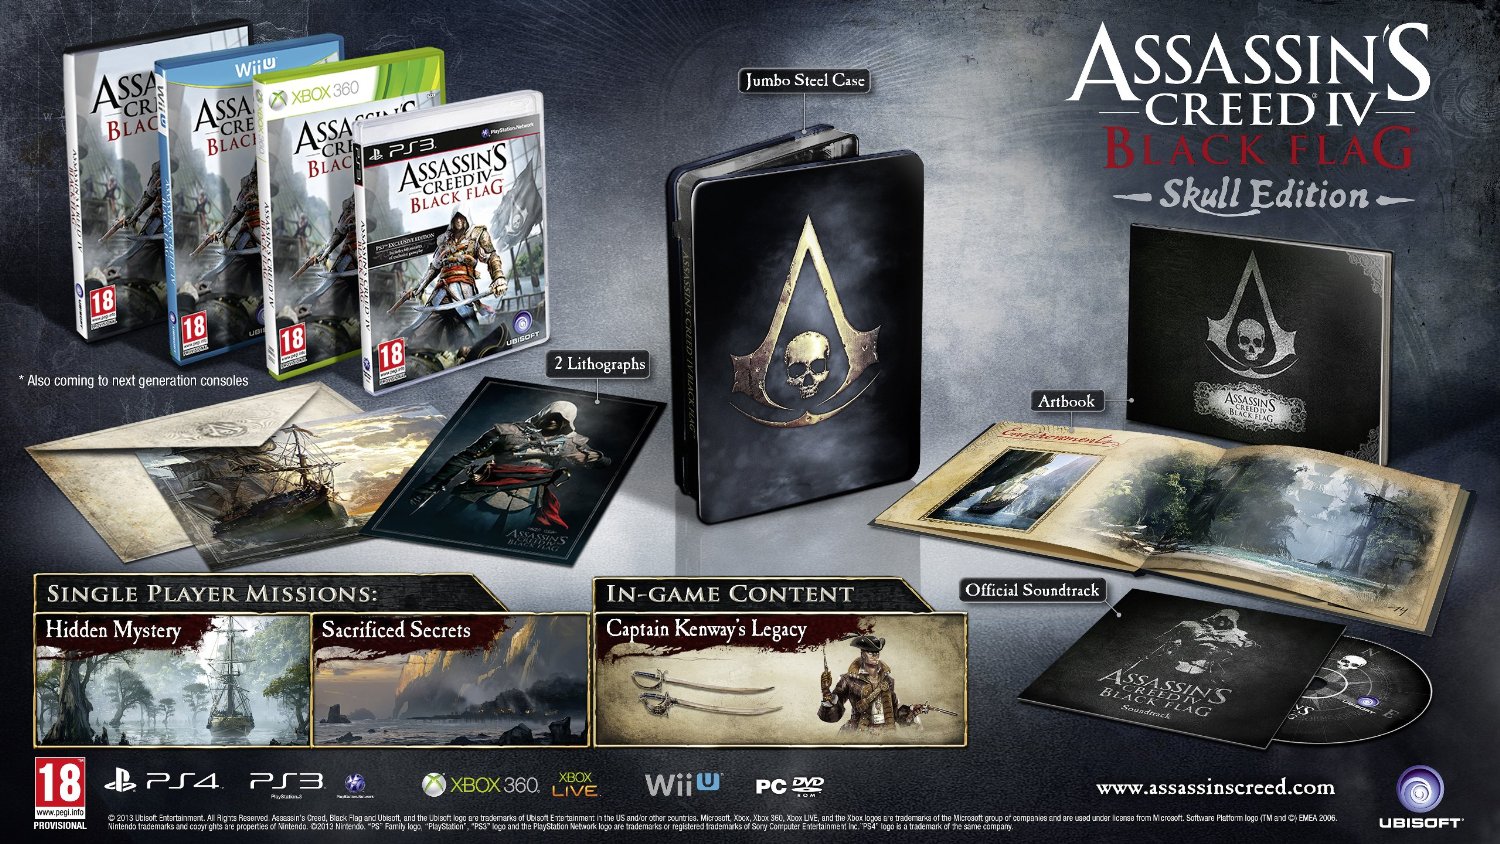 Assassin's Creed IV Black Flag is getting a remake, but Skull and